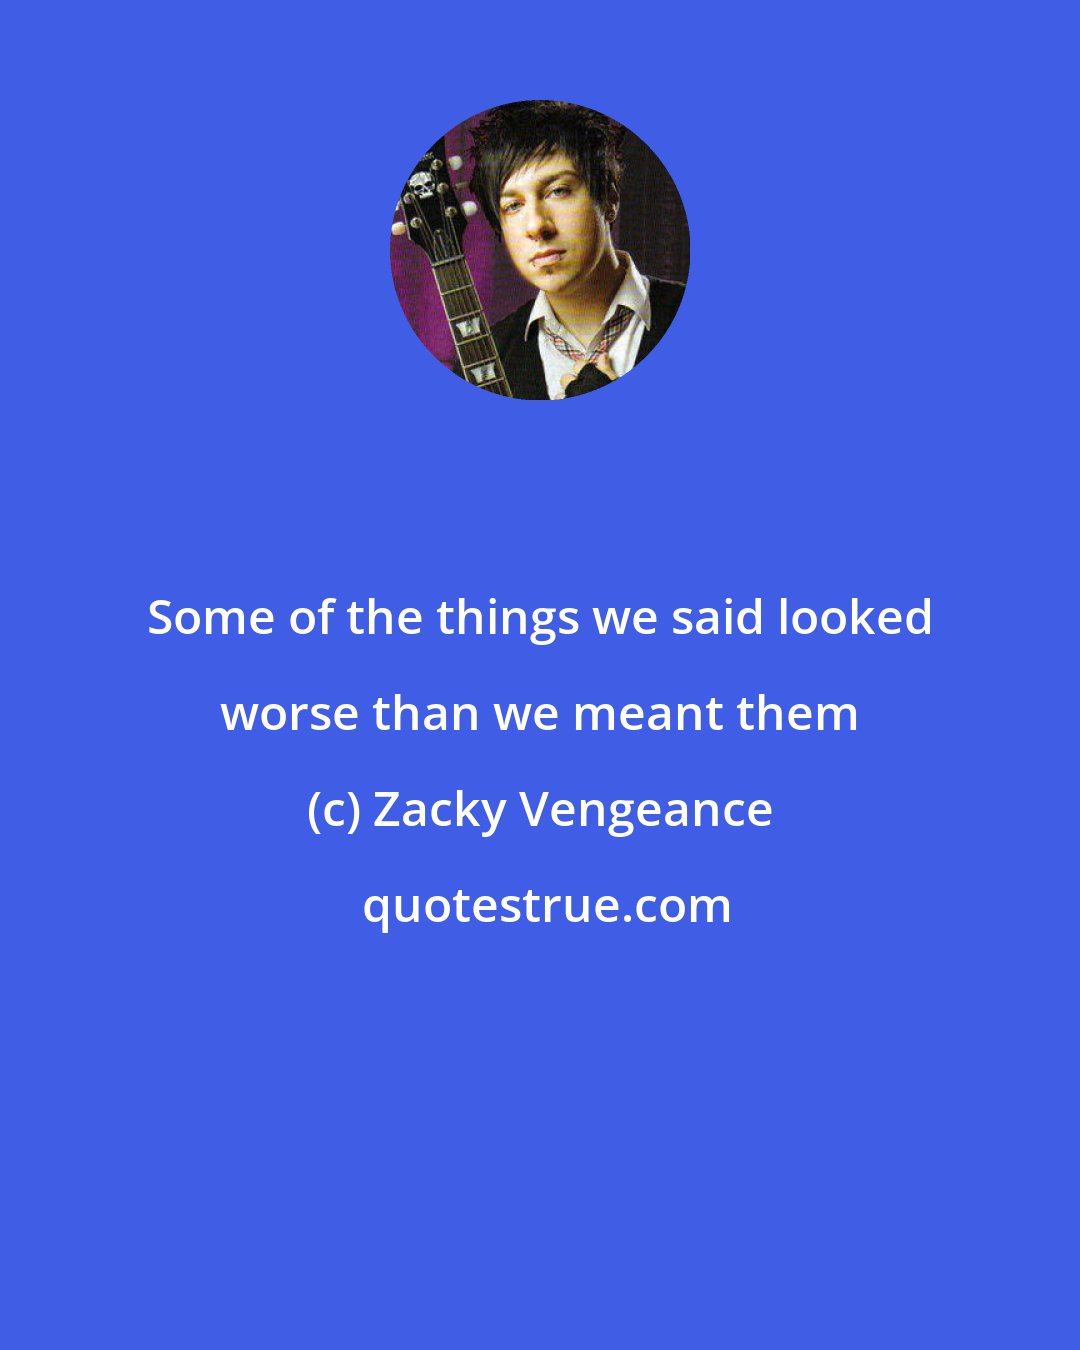 Zacky Vengeance: Some of the things we said looked worse than we meant them